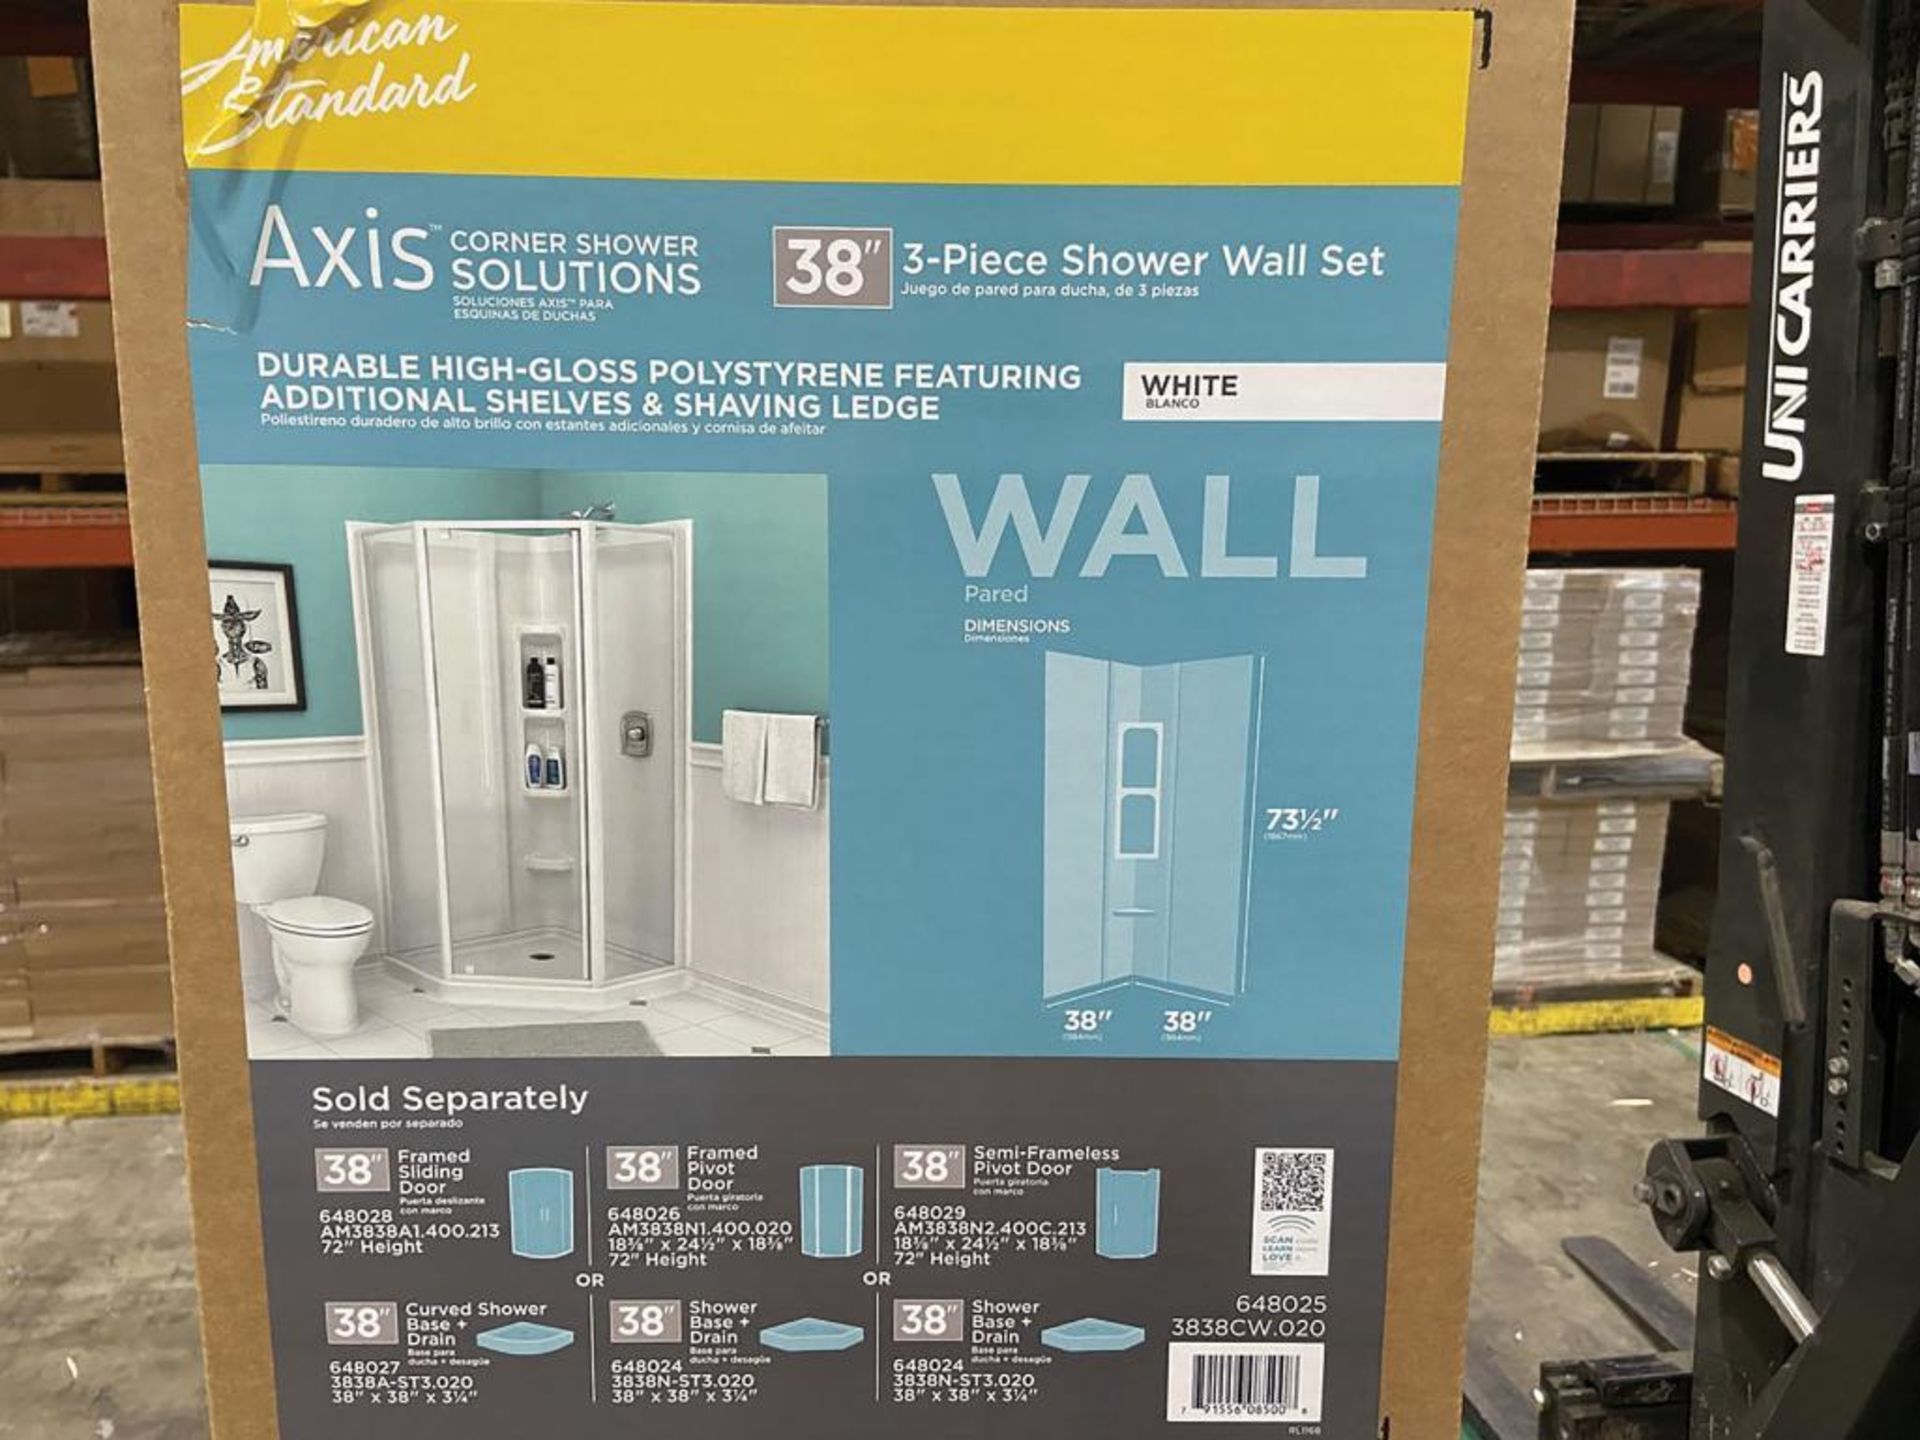 (3) American Standard "Axis" 3-Piece Shower Wall Sets, Model 3838CW.020, Color: White, Polystyrene w - Image 3 of 6